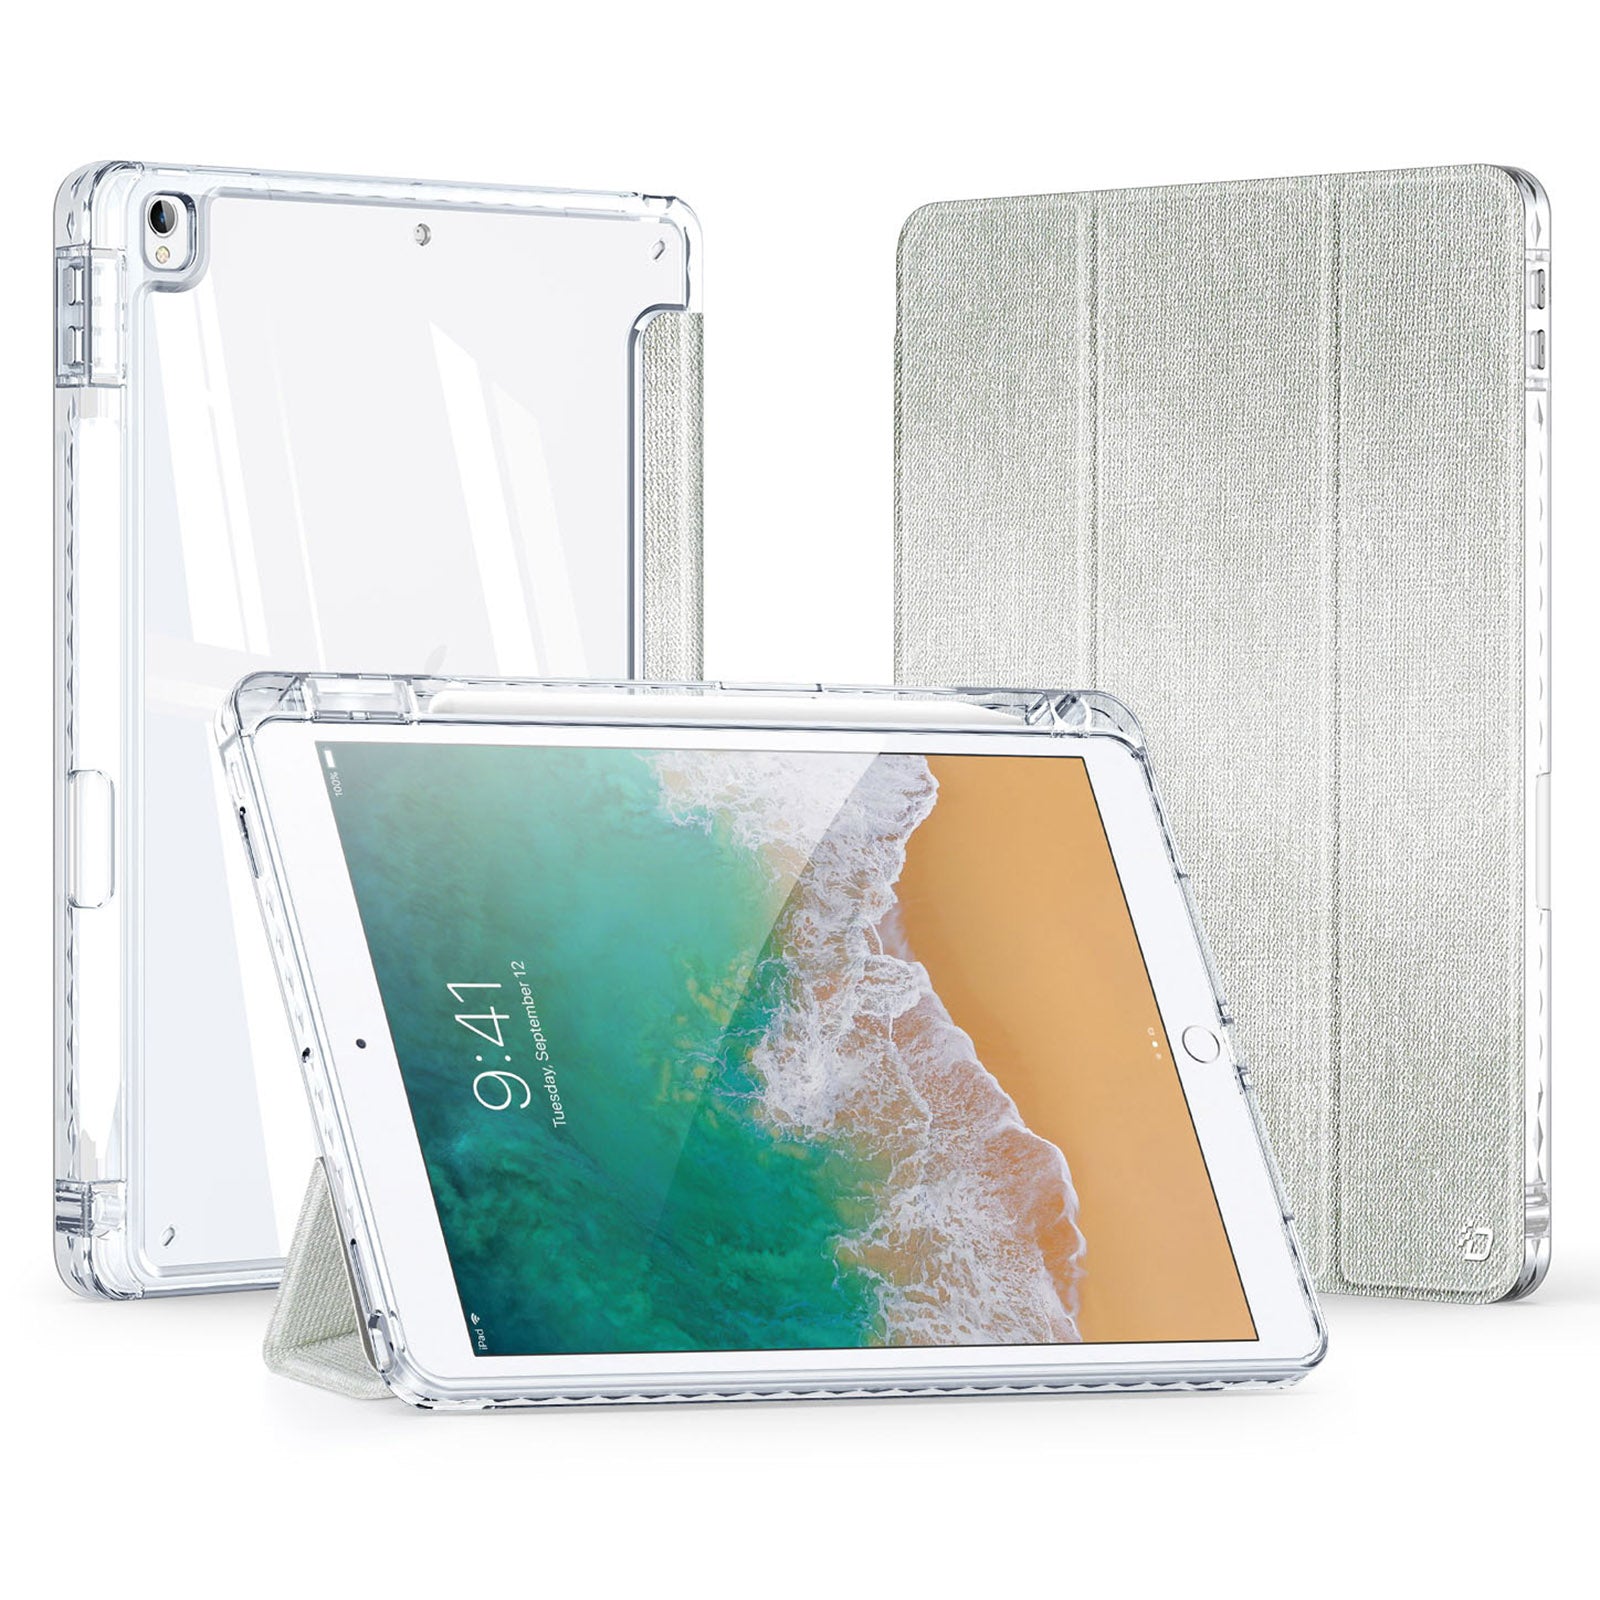 DUX DUCIS Unid Series For iPad 10.2 (2021) / (2020) / (2019) / iPad Air 10.5 inch (2019) / Pro 10.5-inch (2017) Leather Case Clear Back Cover - Light Green